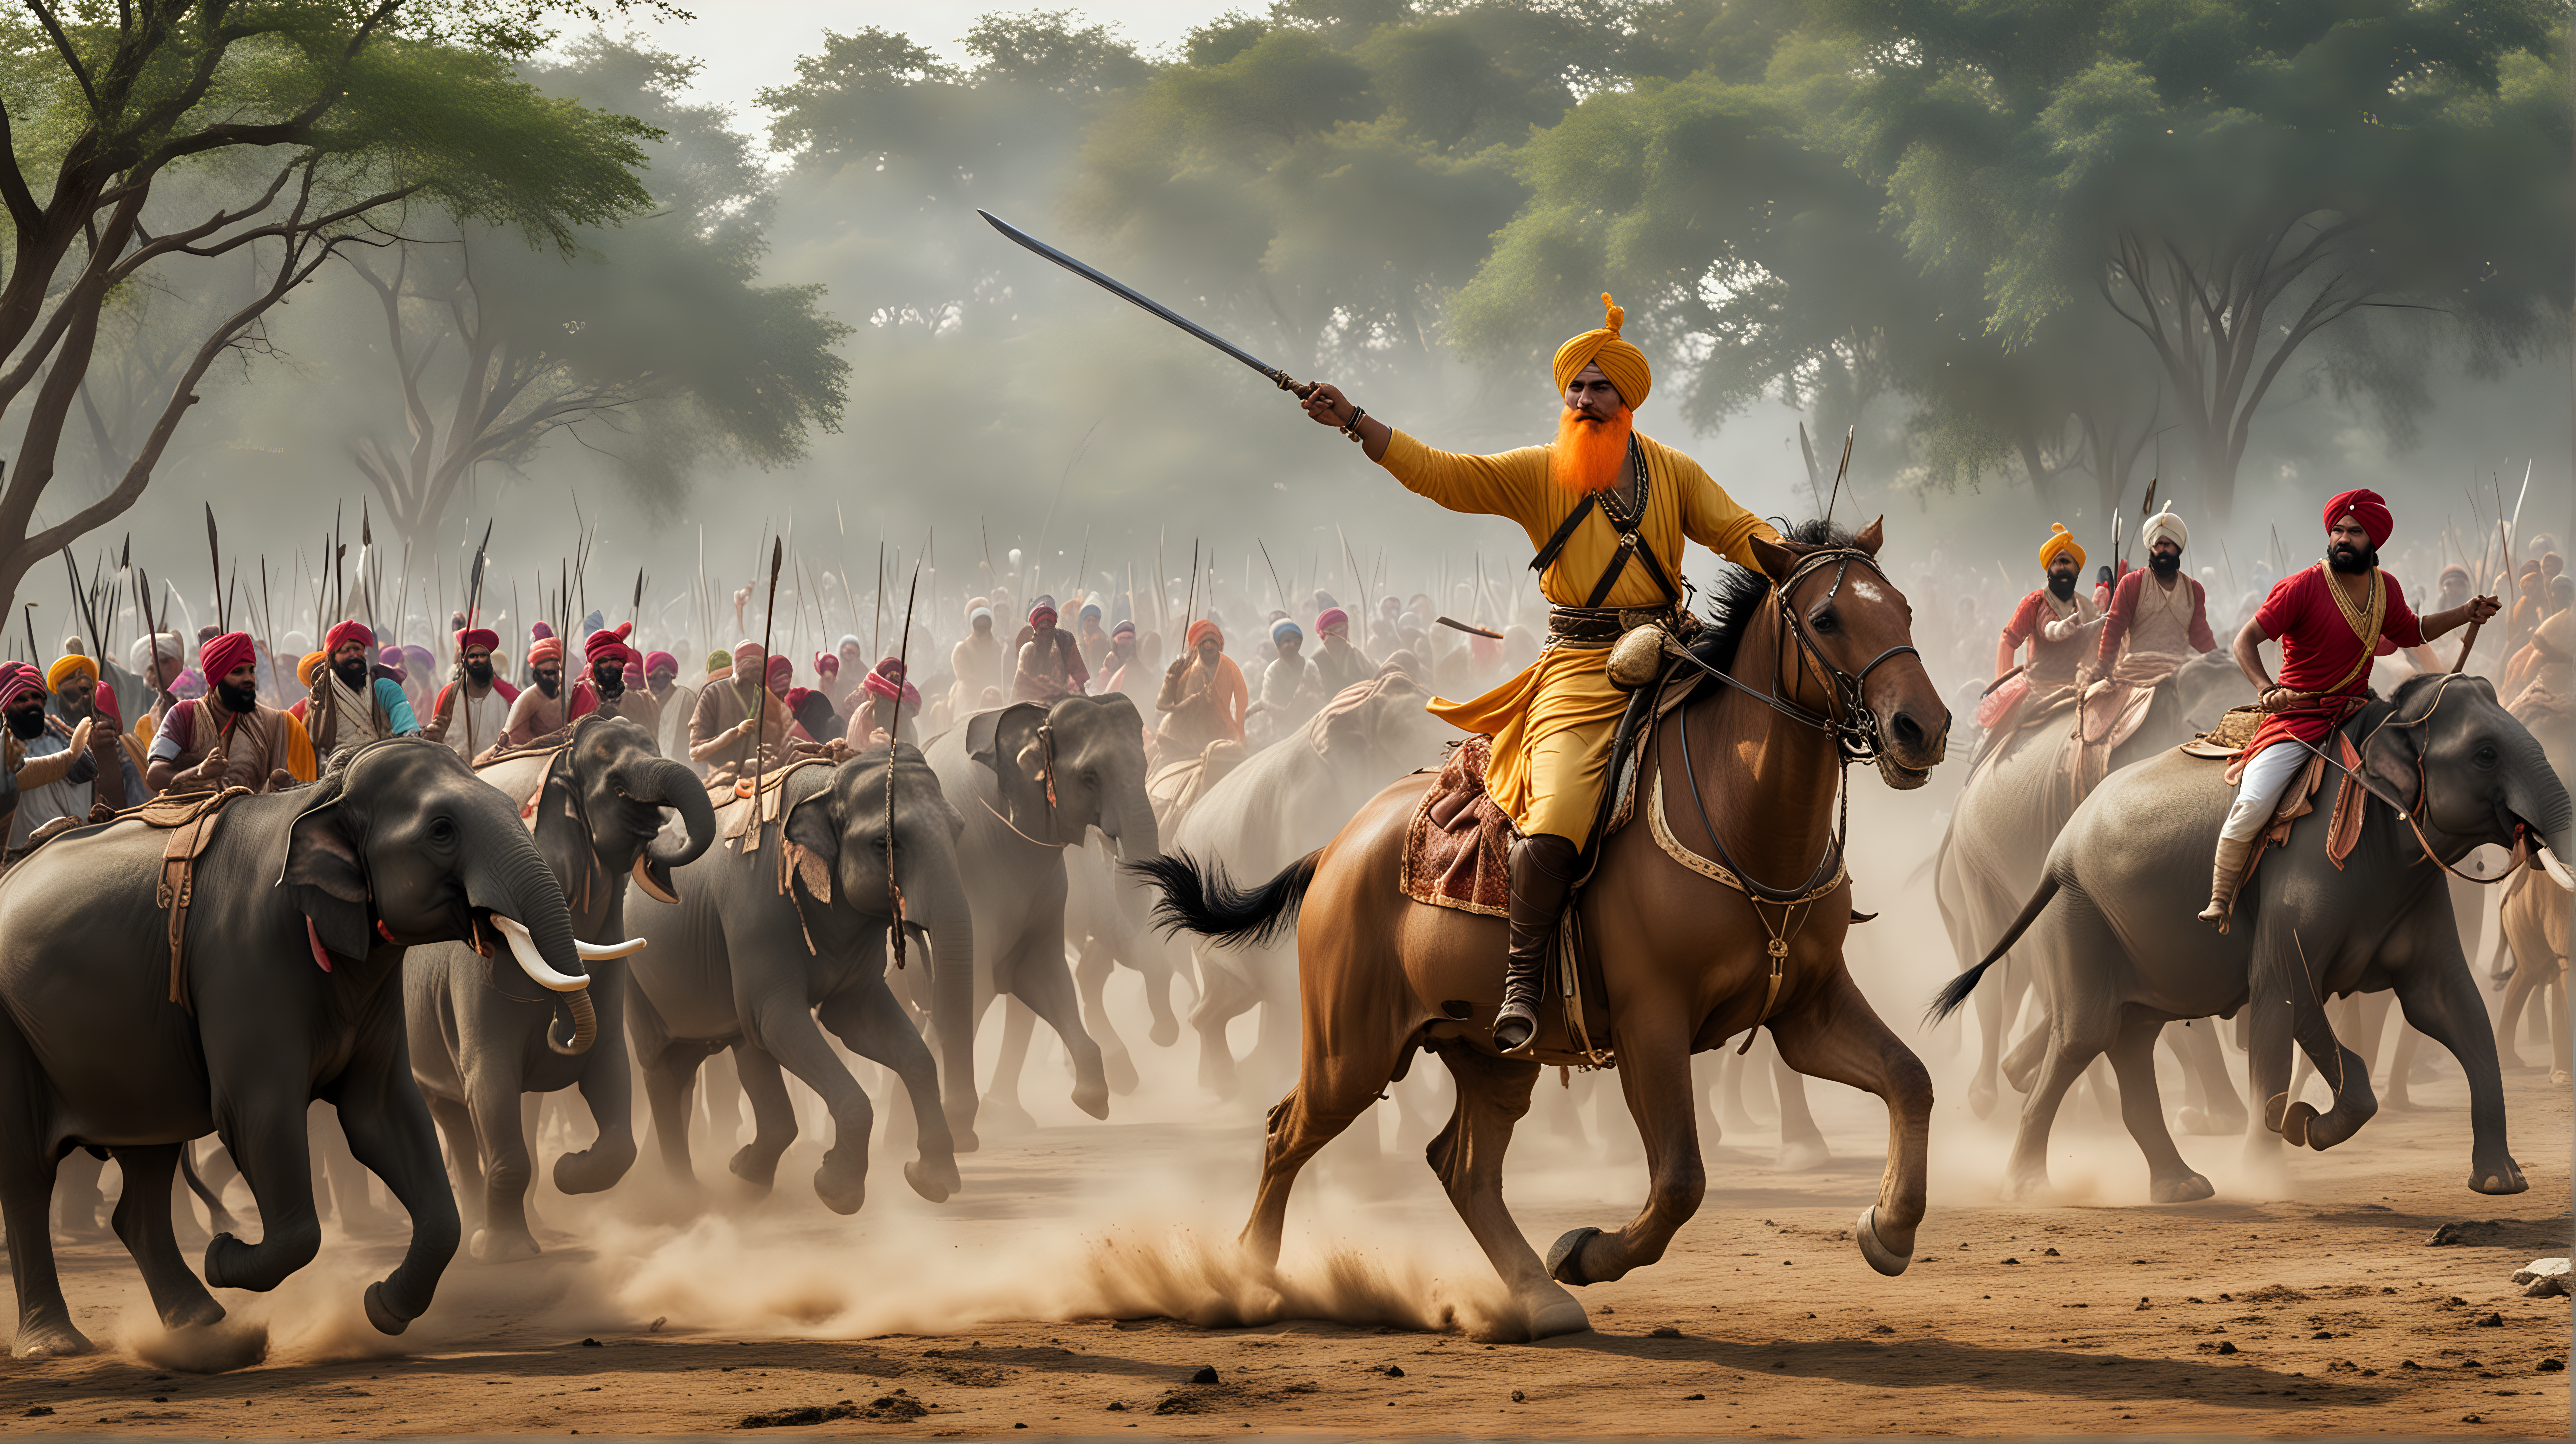 Sikh Warriors Battle Elephants and Tigers Mughal Empire Conflict in Historical India